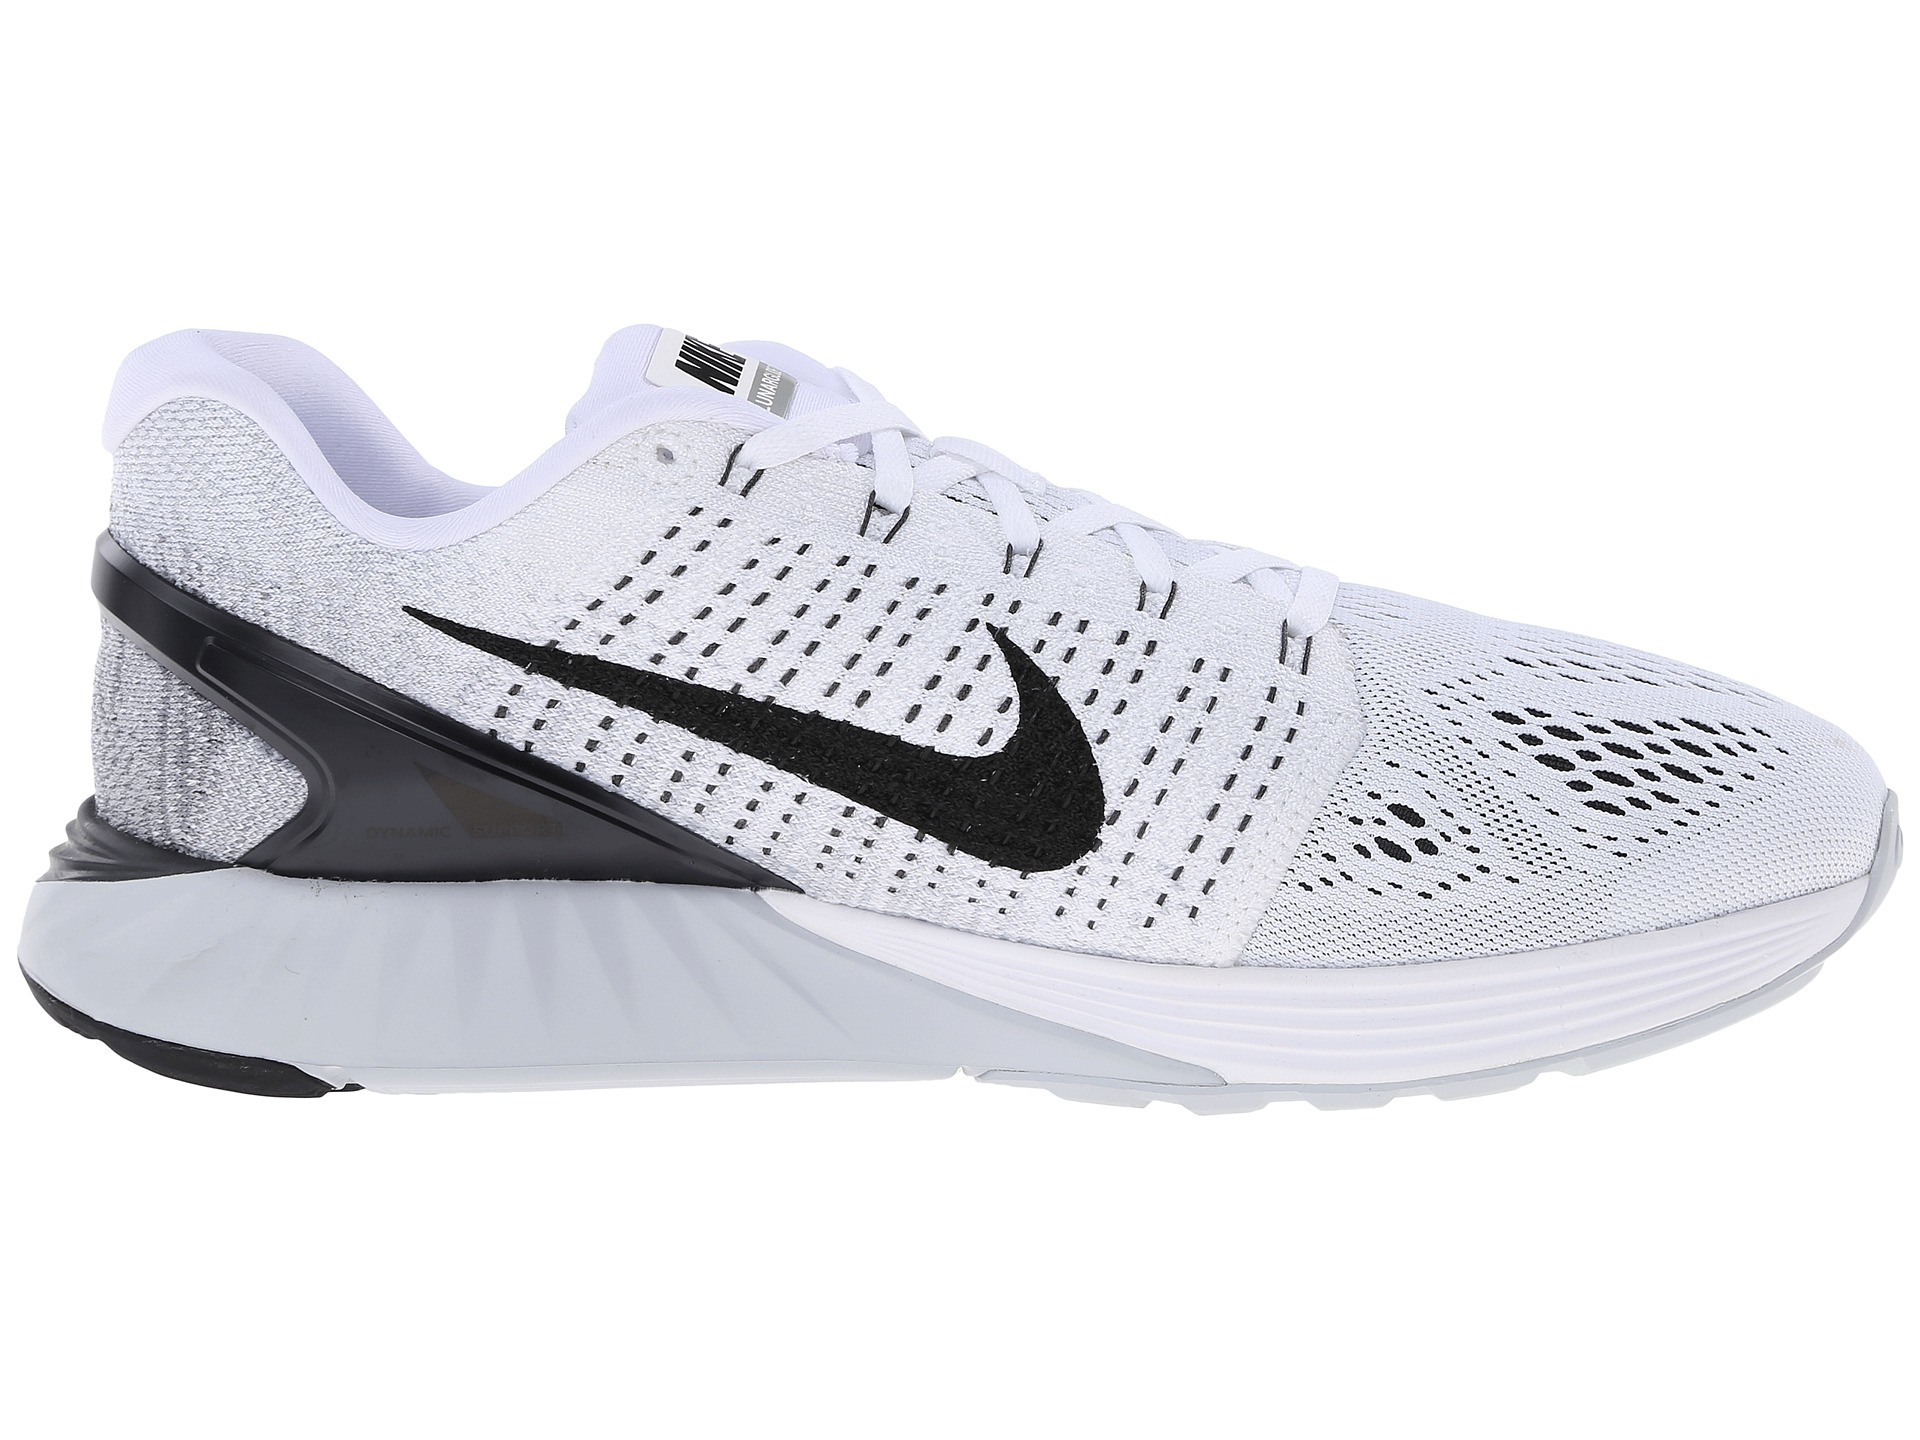 Nike Lunarglide 7 in White/Black/Anthracite/Cool Grey (White) for Men - Lyst